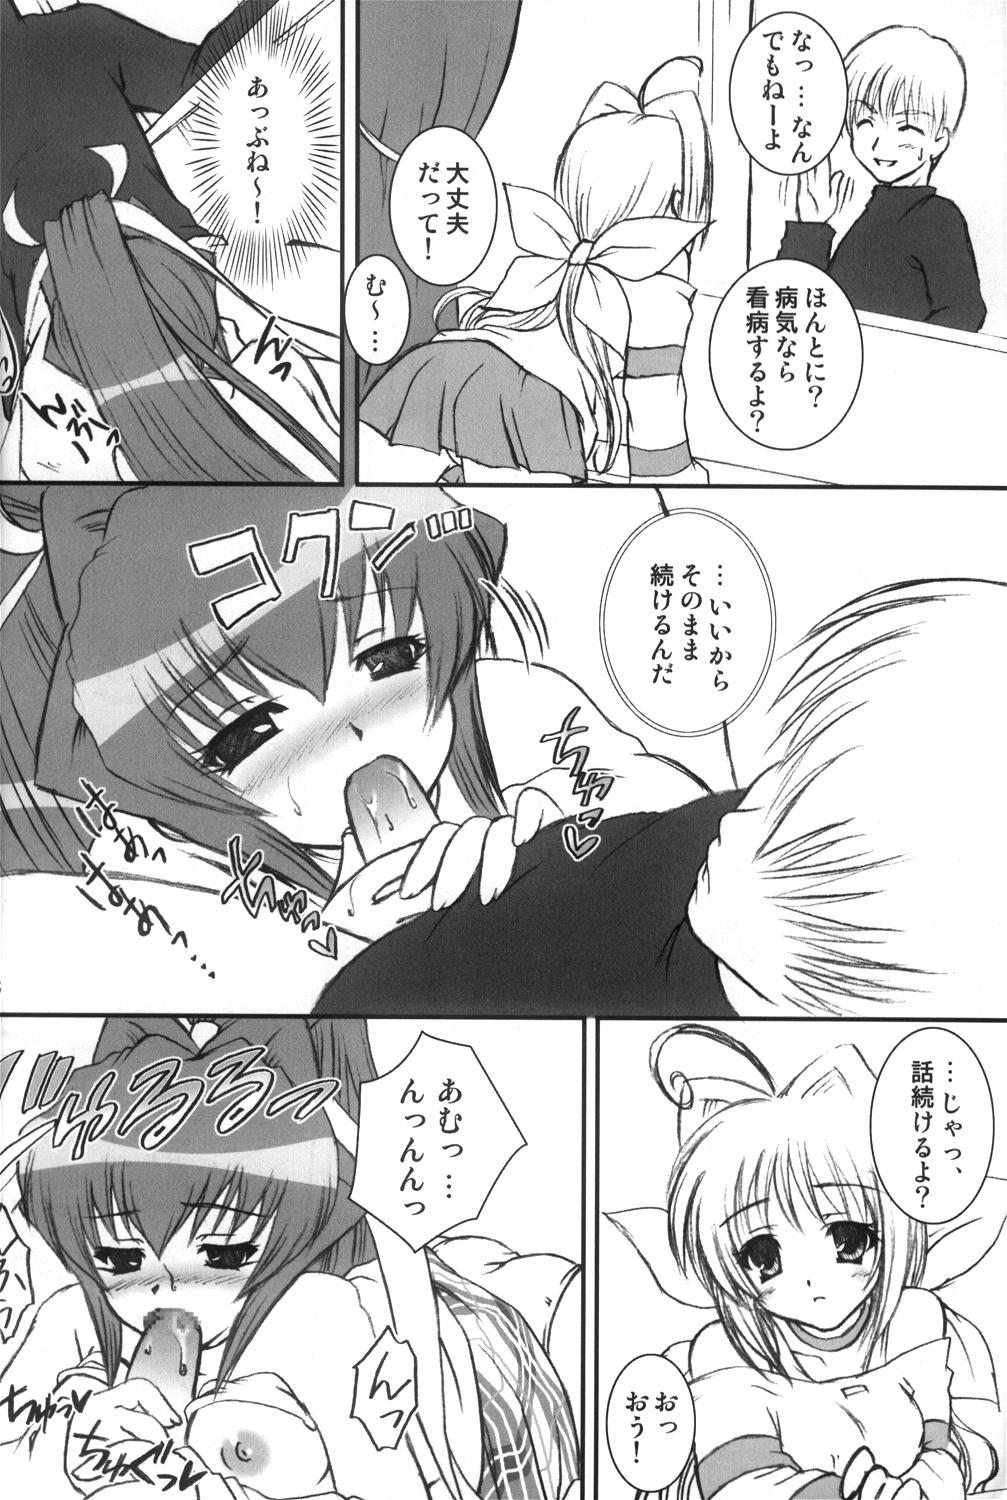 Men I have fallen in love with you... - Muv-luv Italiana - Page 7